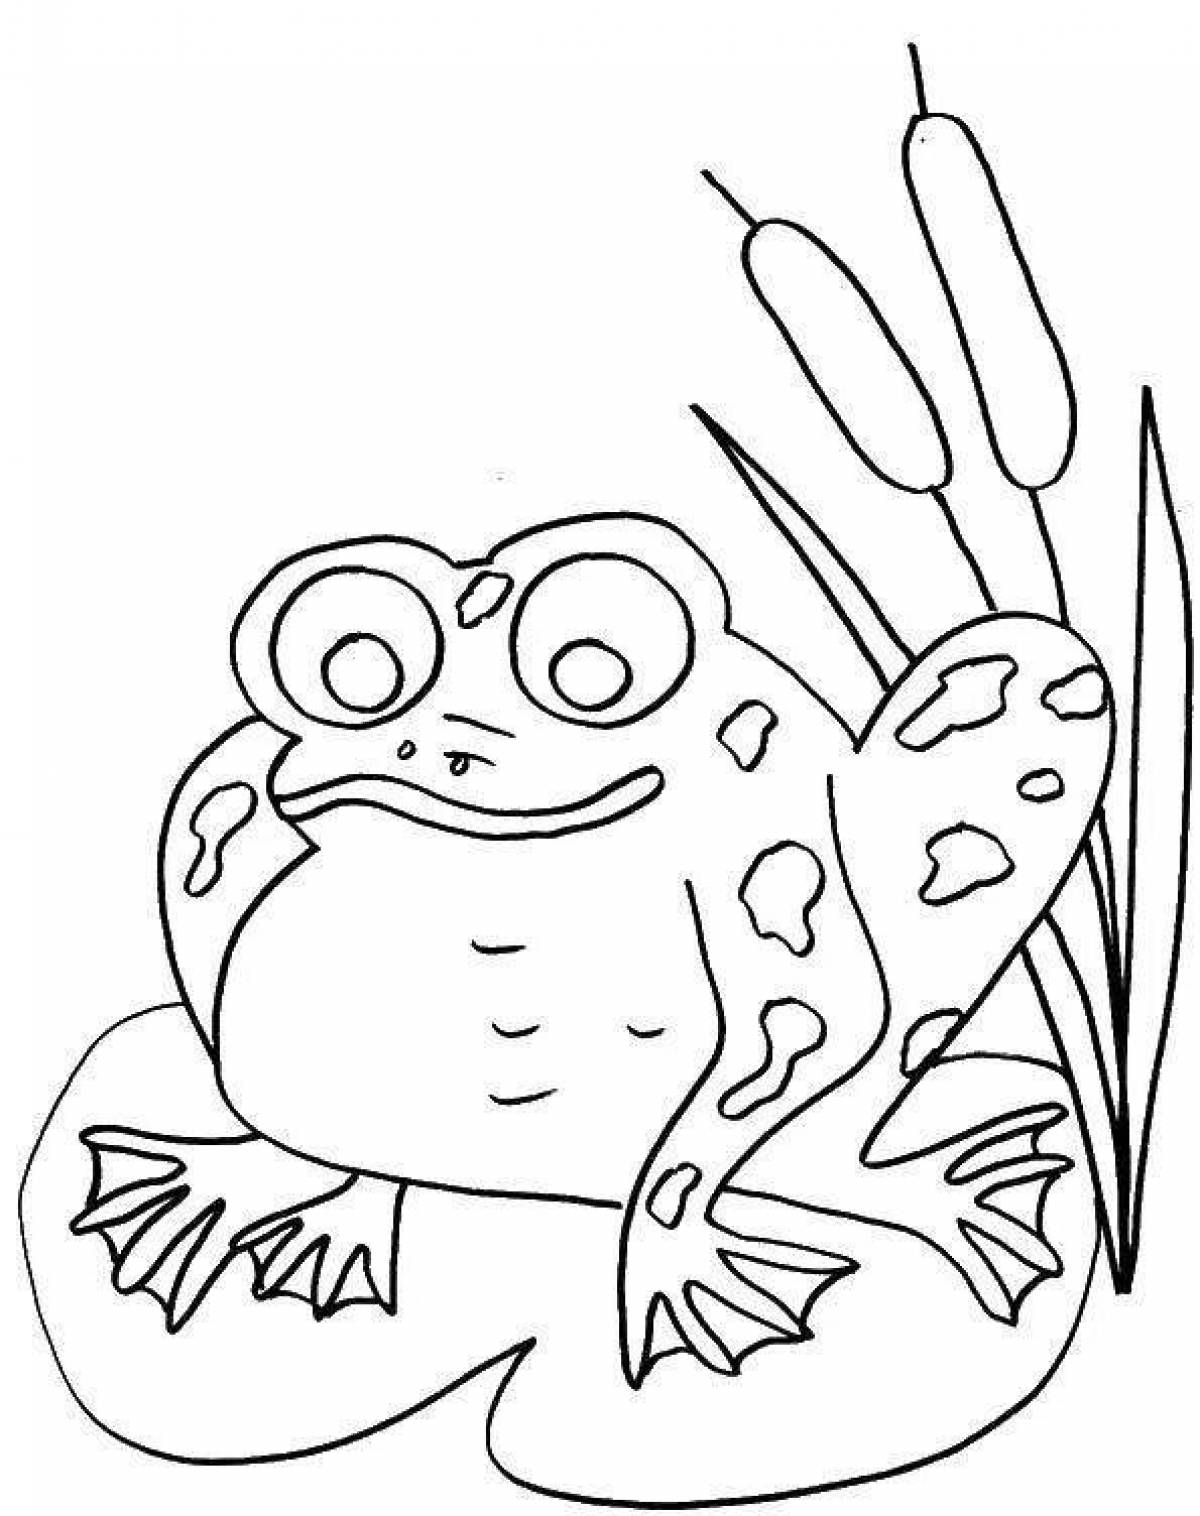 Coloring fairytale toad and rose